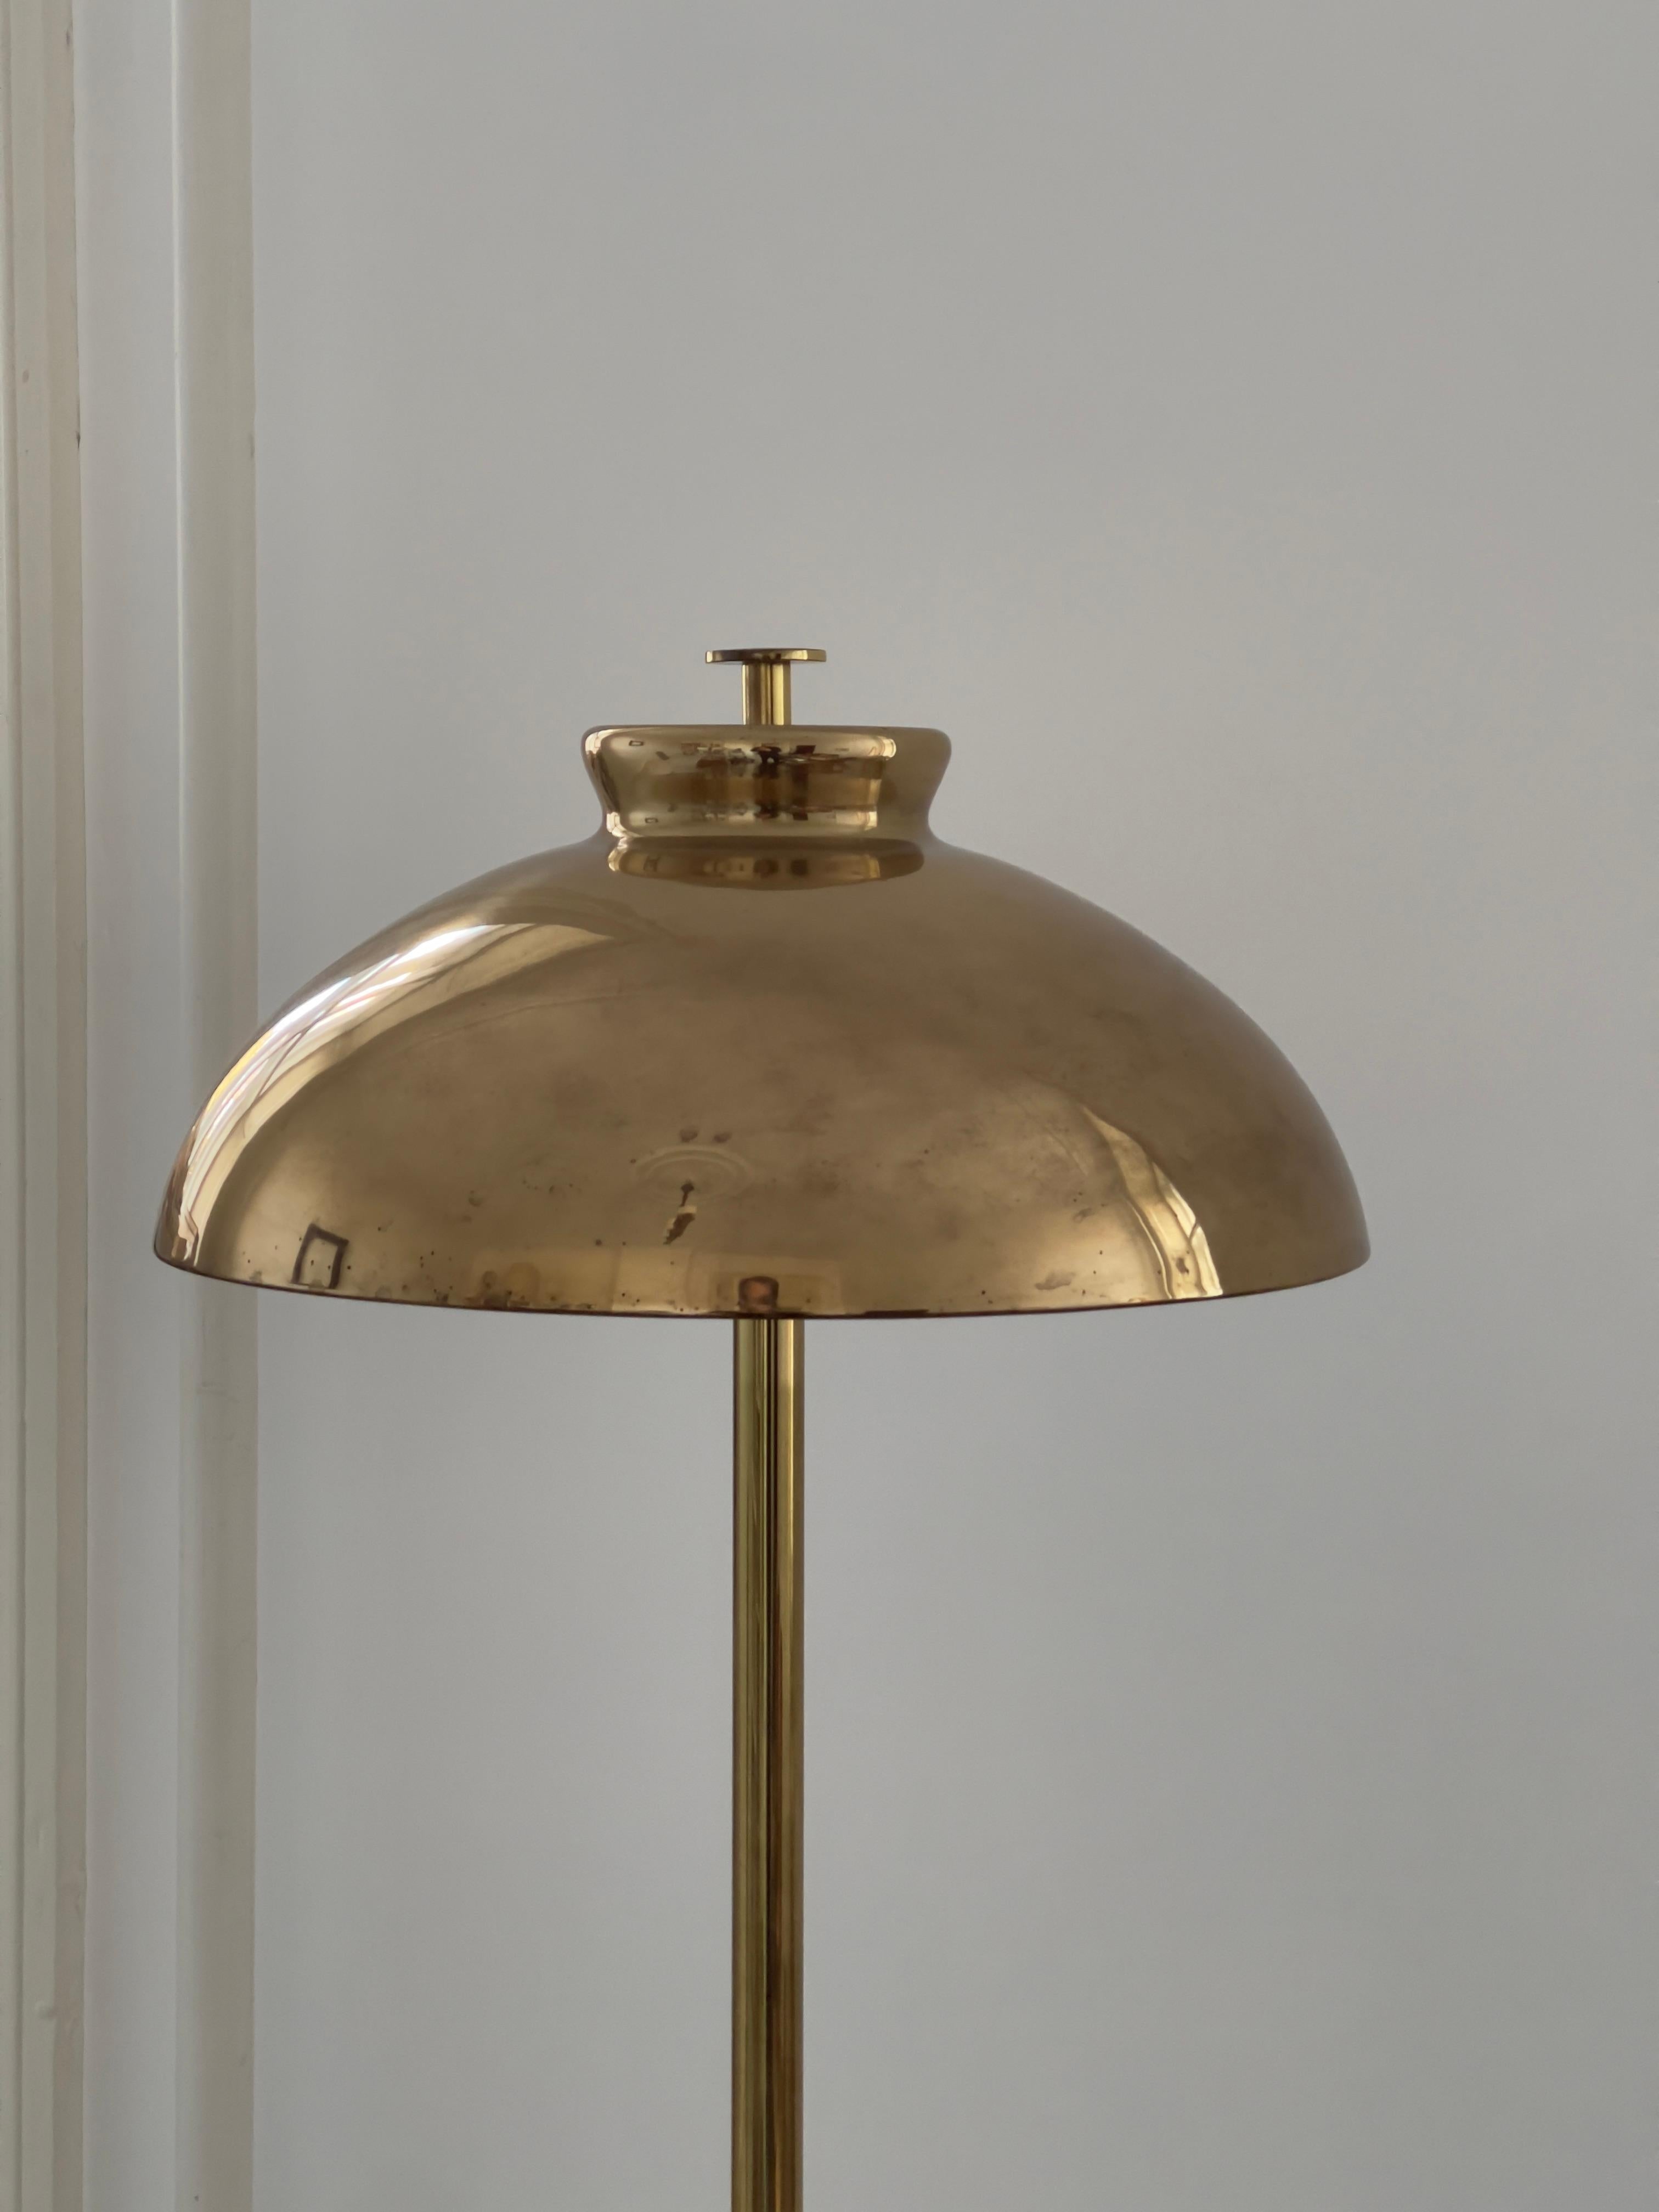 Mid-20th Century 1960s Scandinavian Midcentury Floor Lamp in Patinated Brass with Perforated Top For Sale